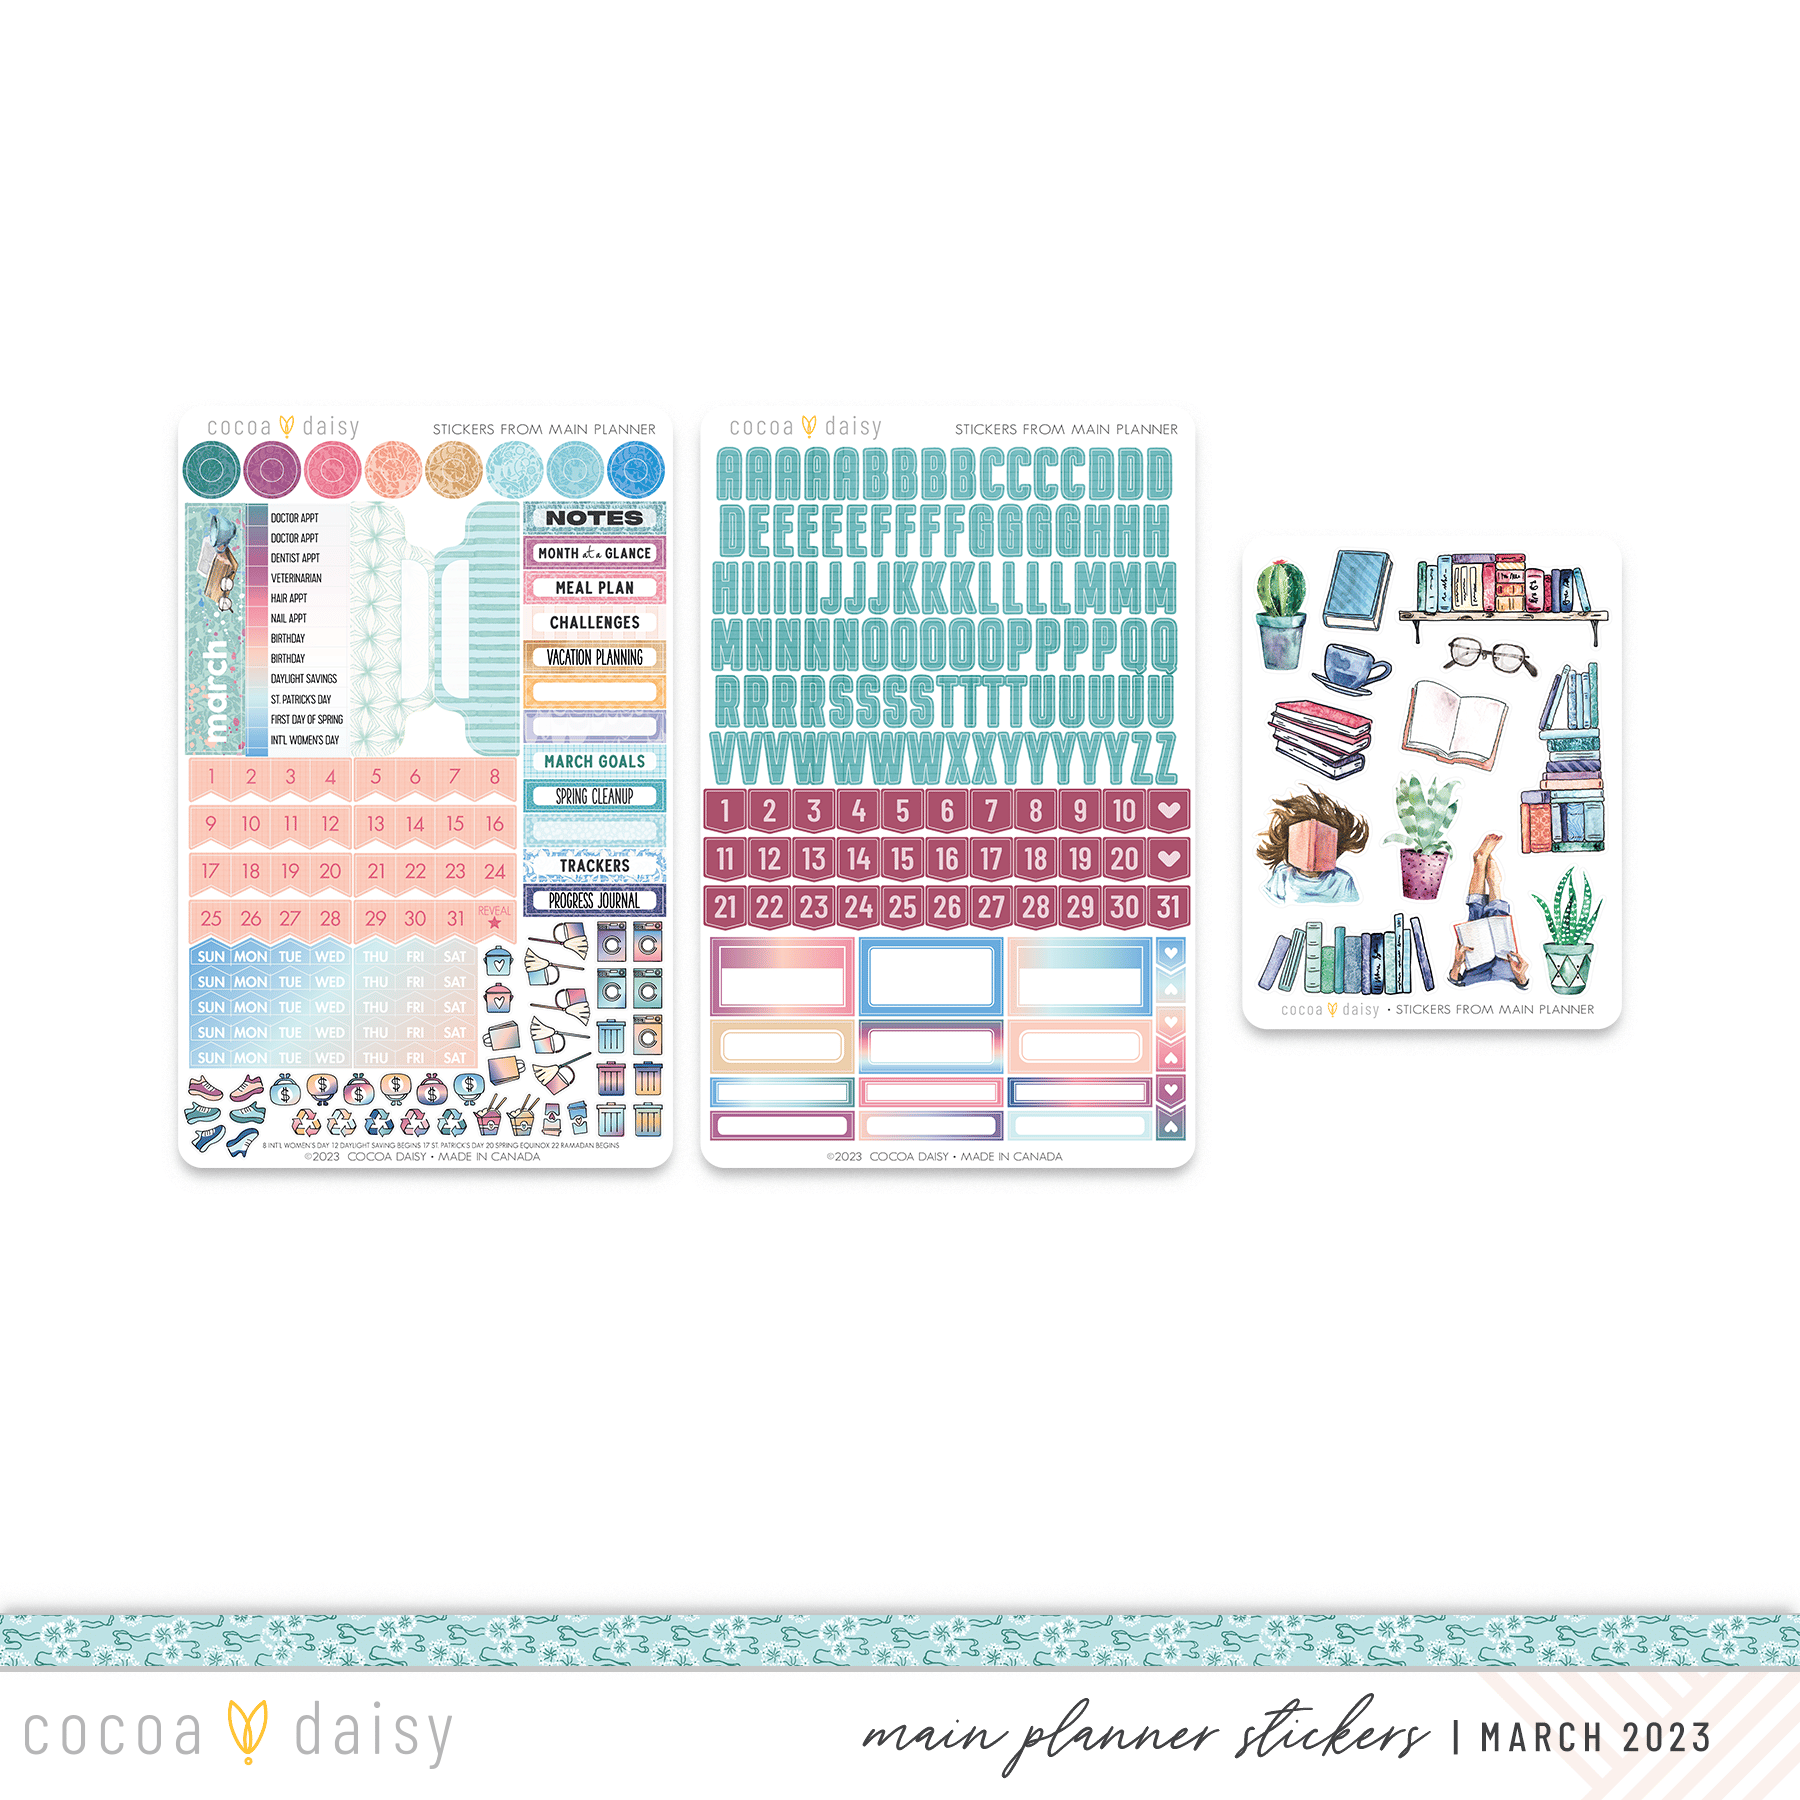 Bookish Stickers from Main Planner March 2023